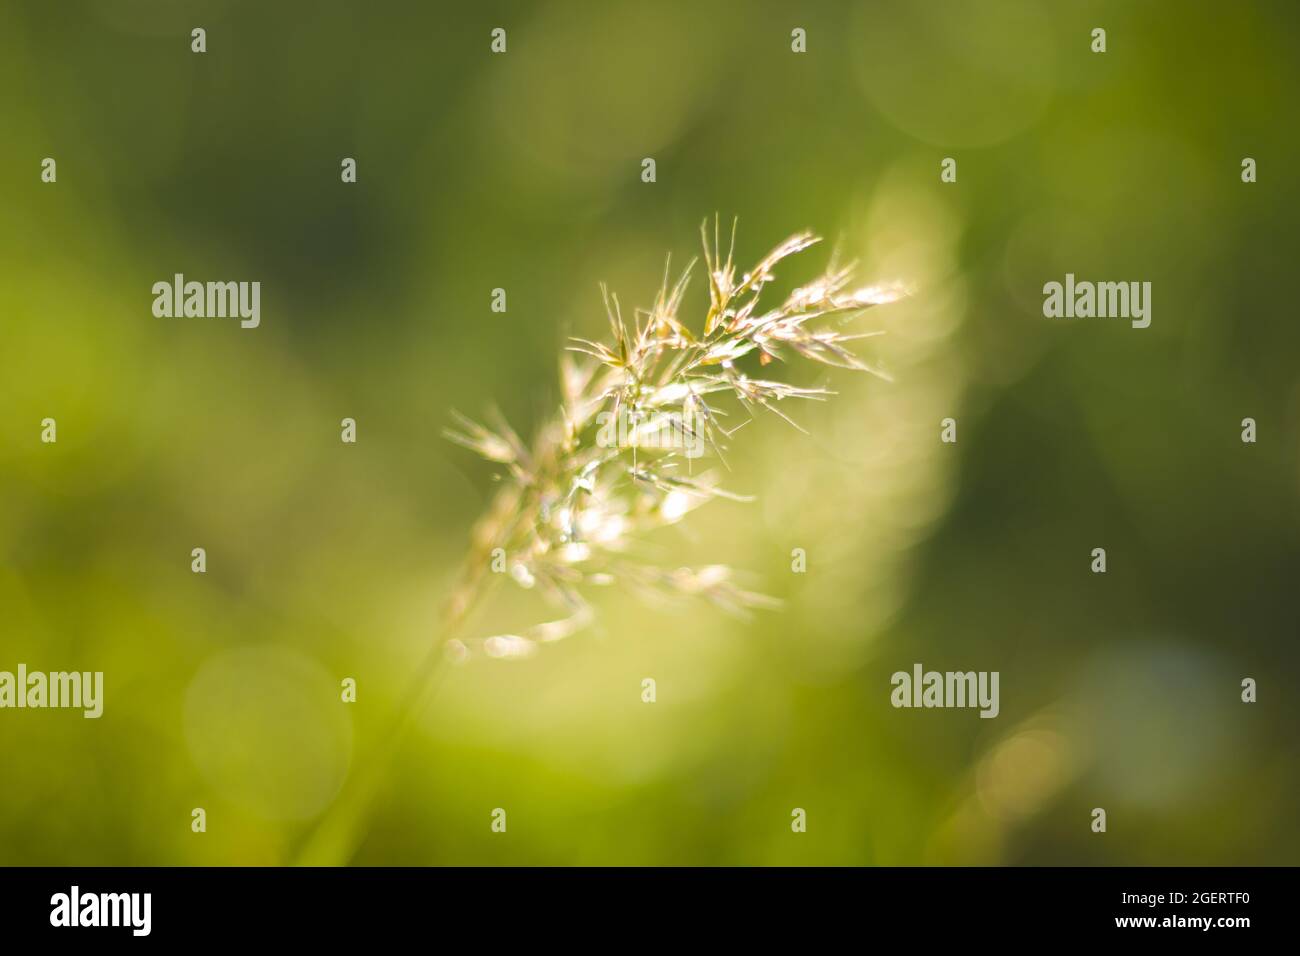 Selective focus shot of a Poa trivialis on a blurry background Stock Photo